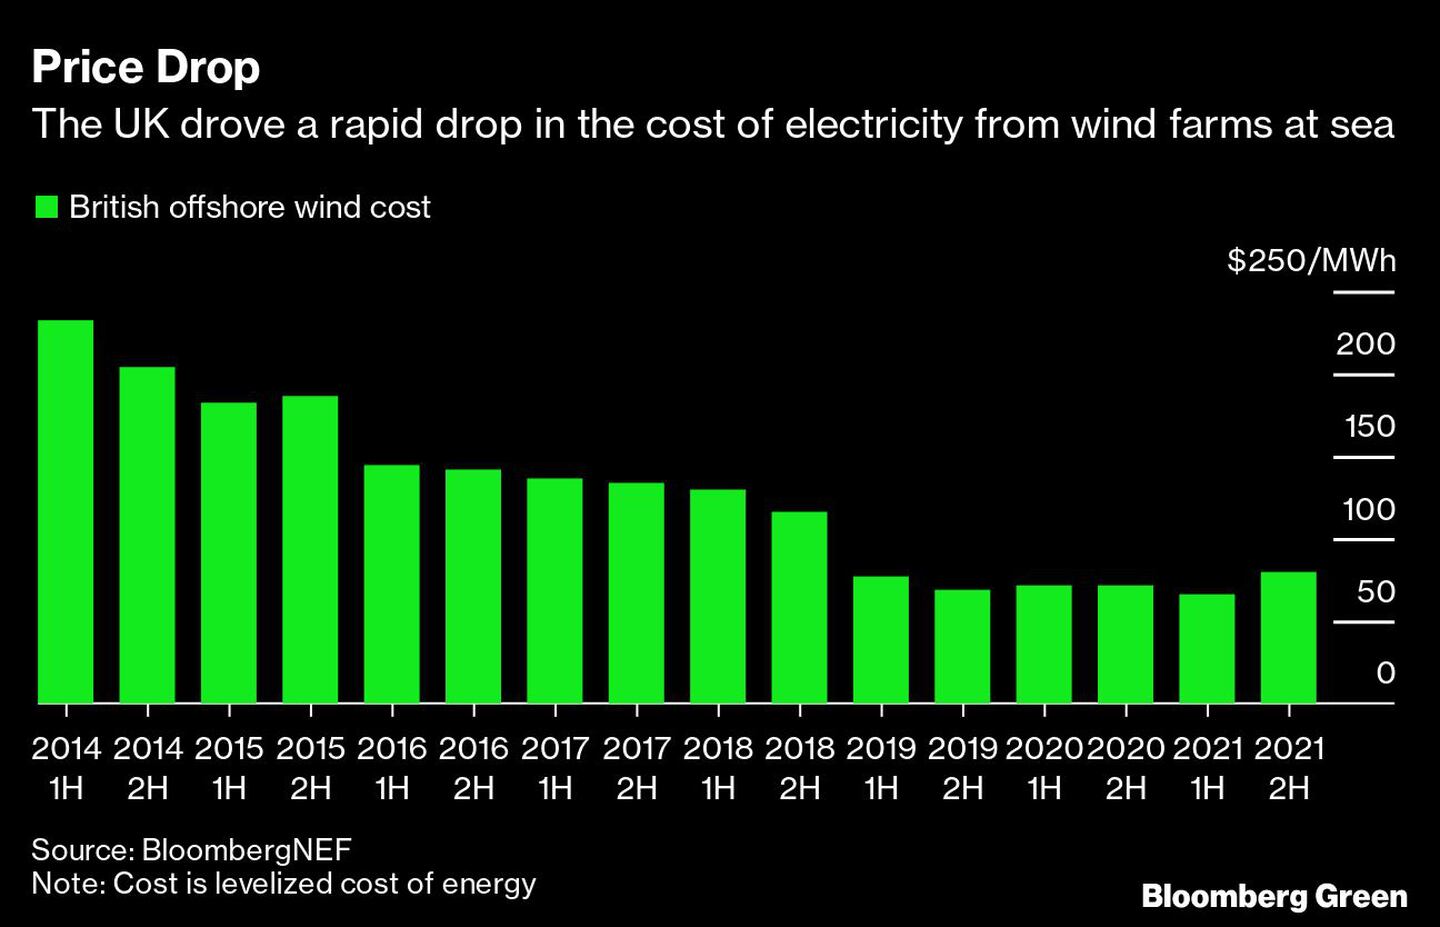 Price Drop | The UK drove a rapid drop in the cost of electricity from wind farms at seadfd